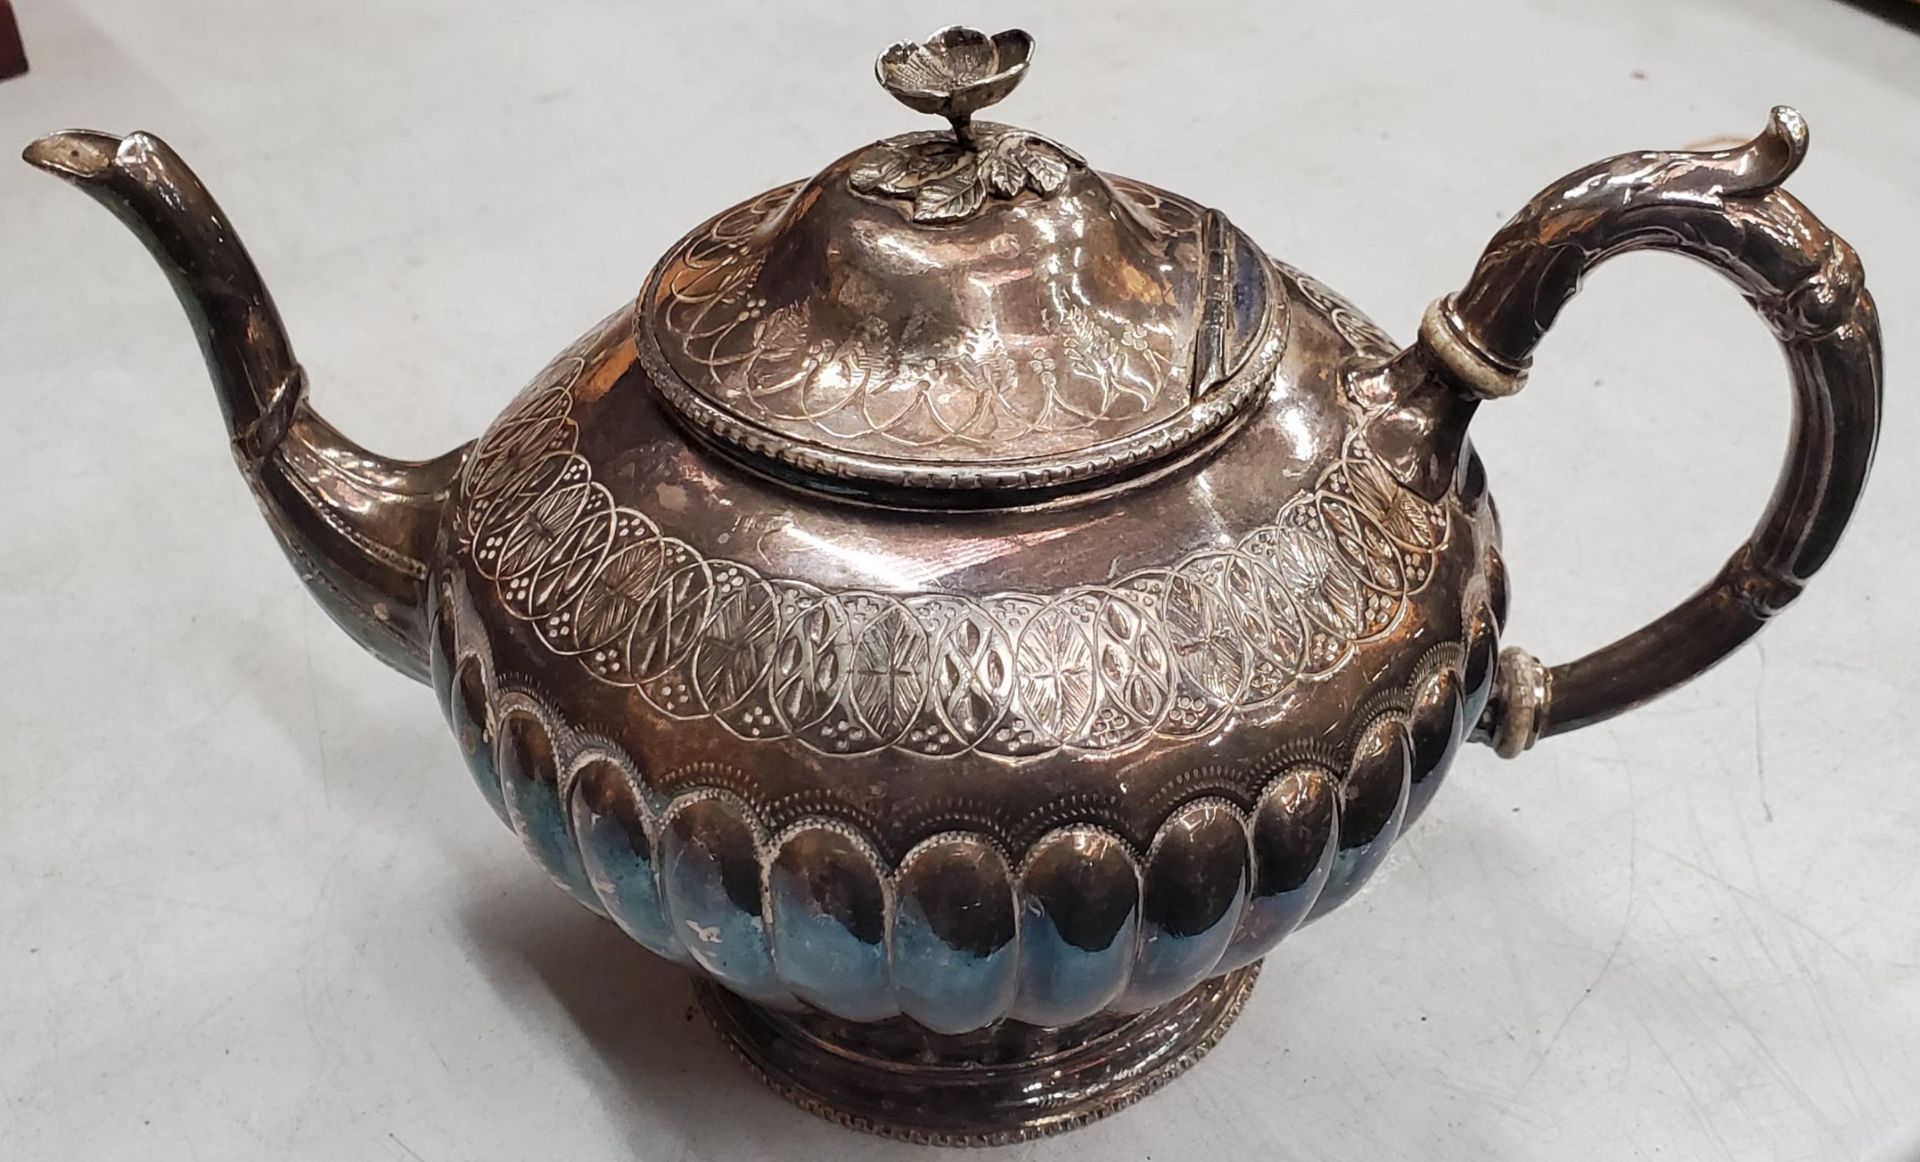 AN ORNATE SILVER PLATED VICTORIAN TEAPOT